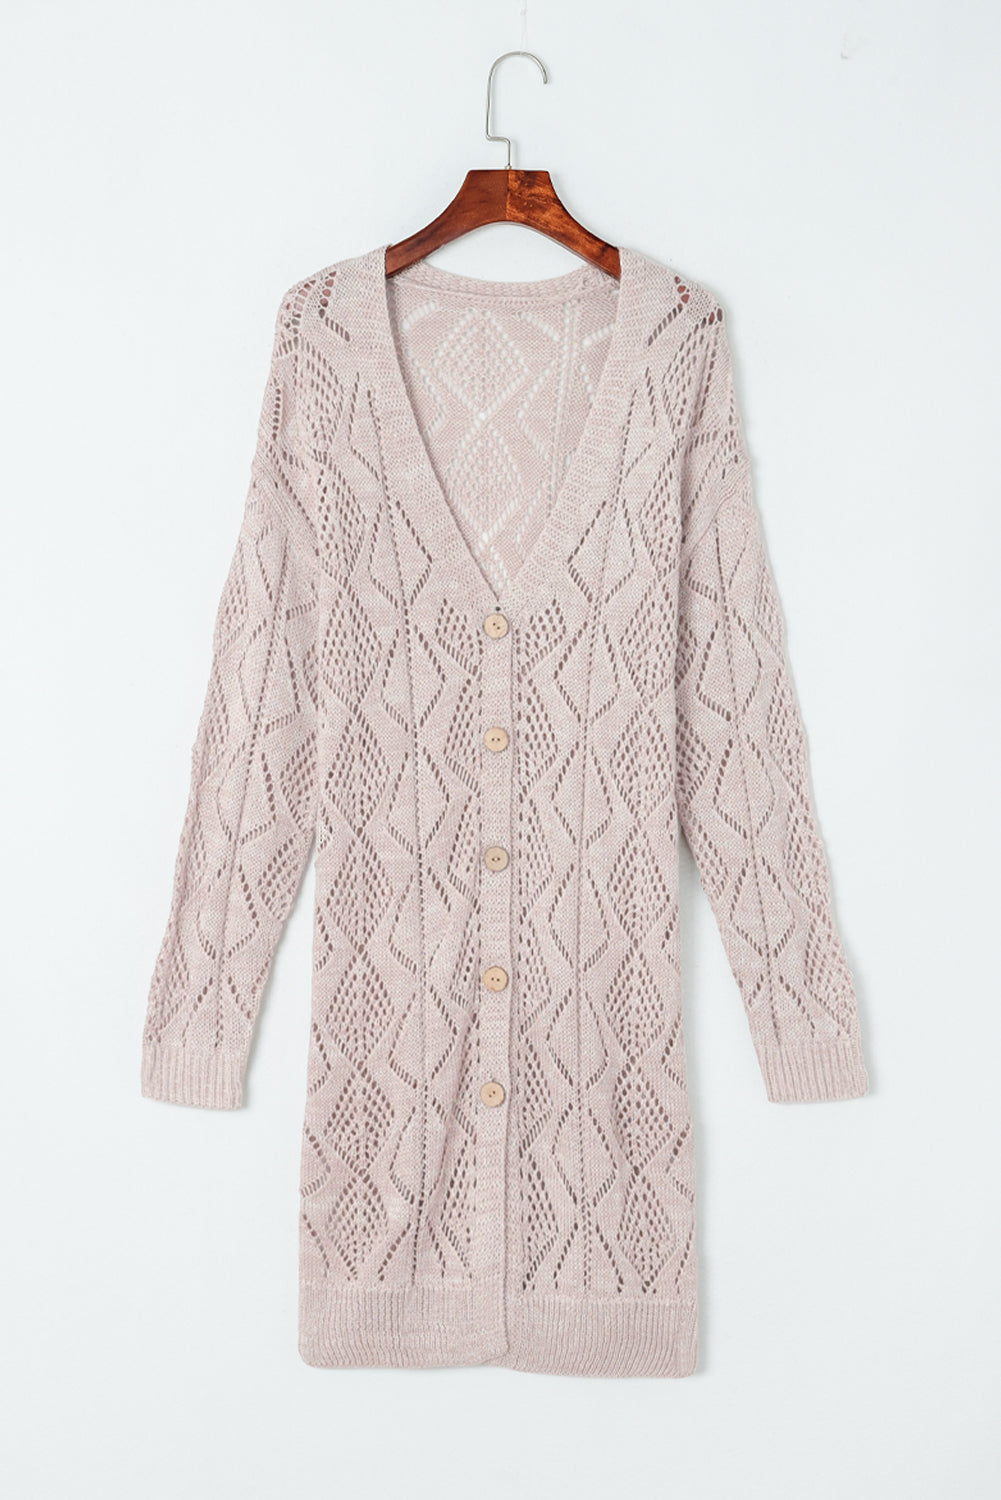 Khaki Hollow-out Openwork Knit Cardigan-8